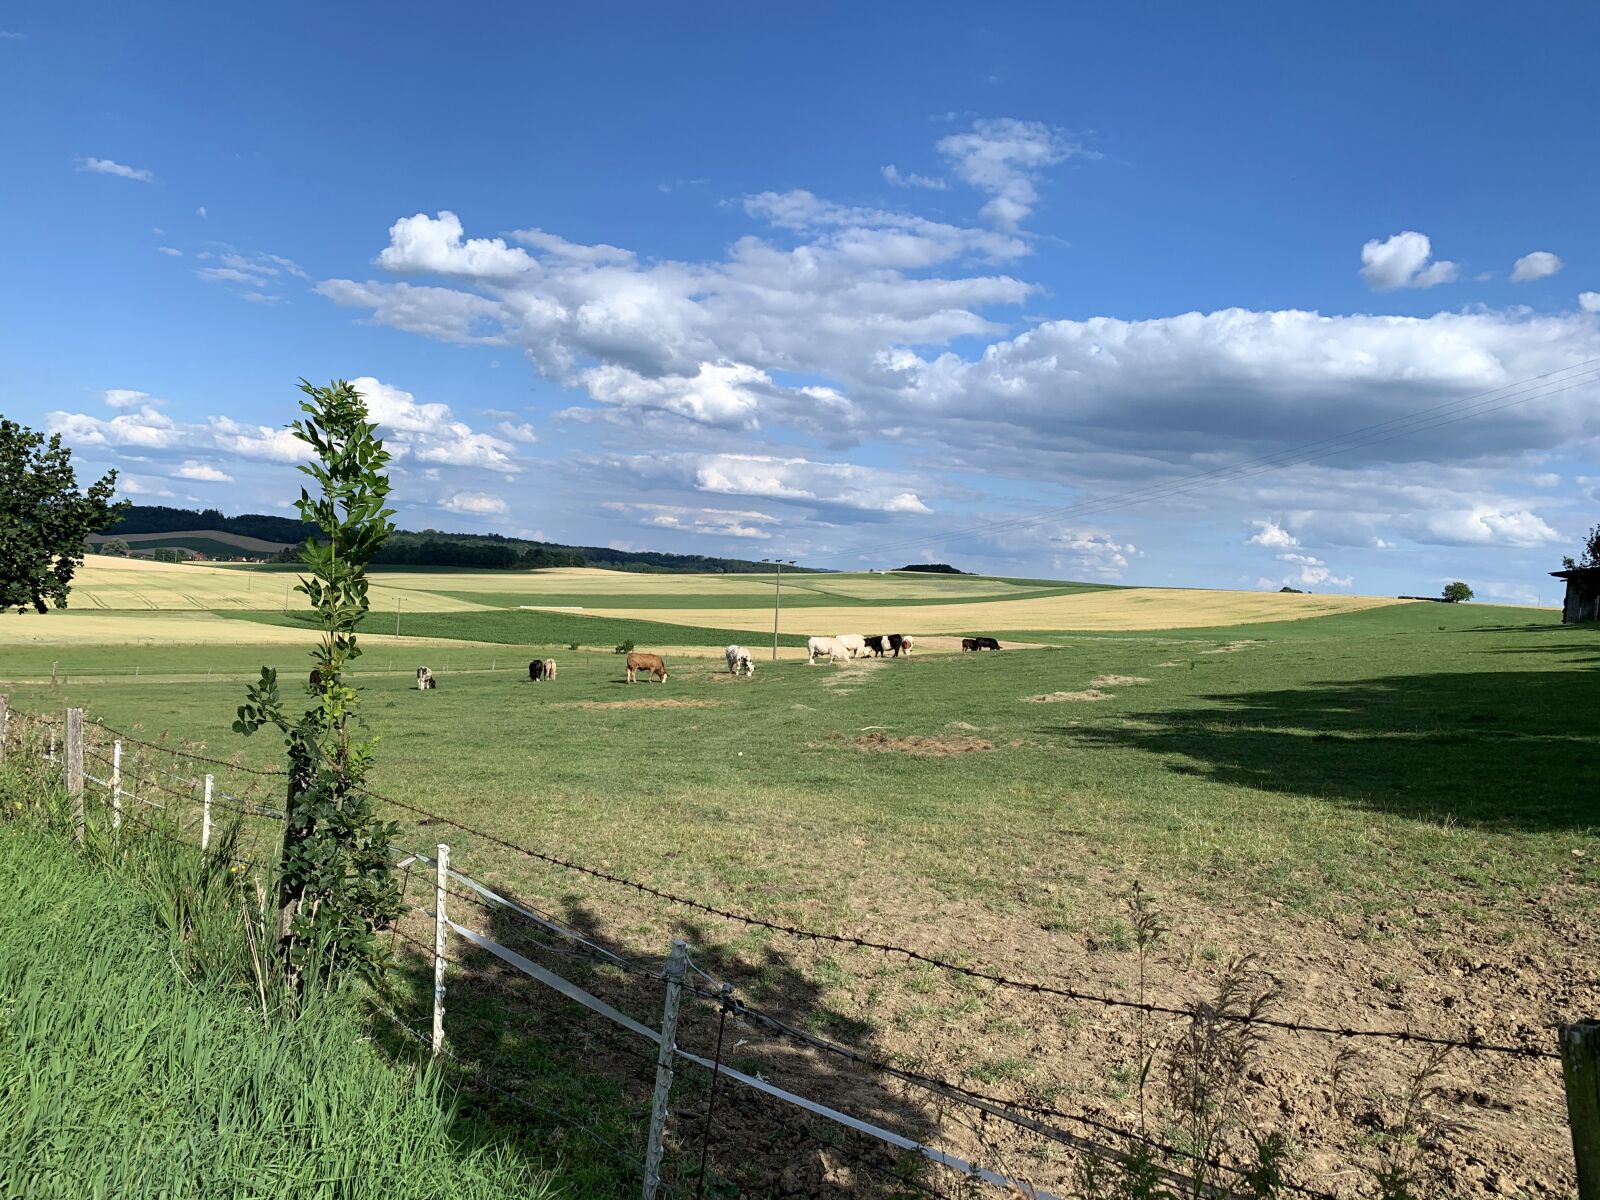 Apple iPhone XR sample photo. Meadow, cows, nature photography